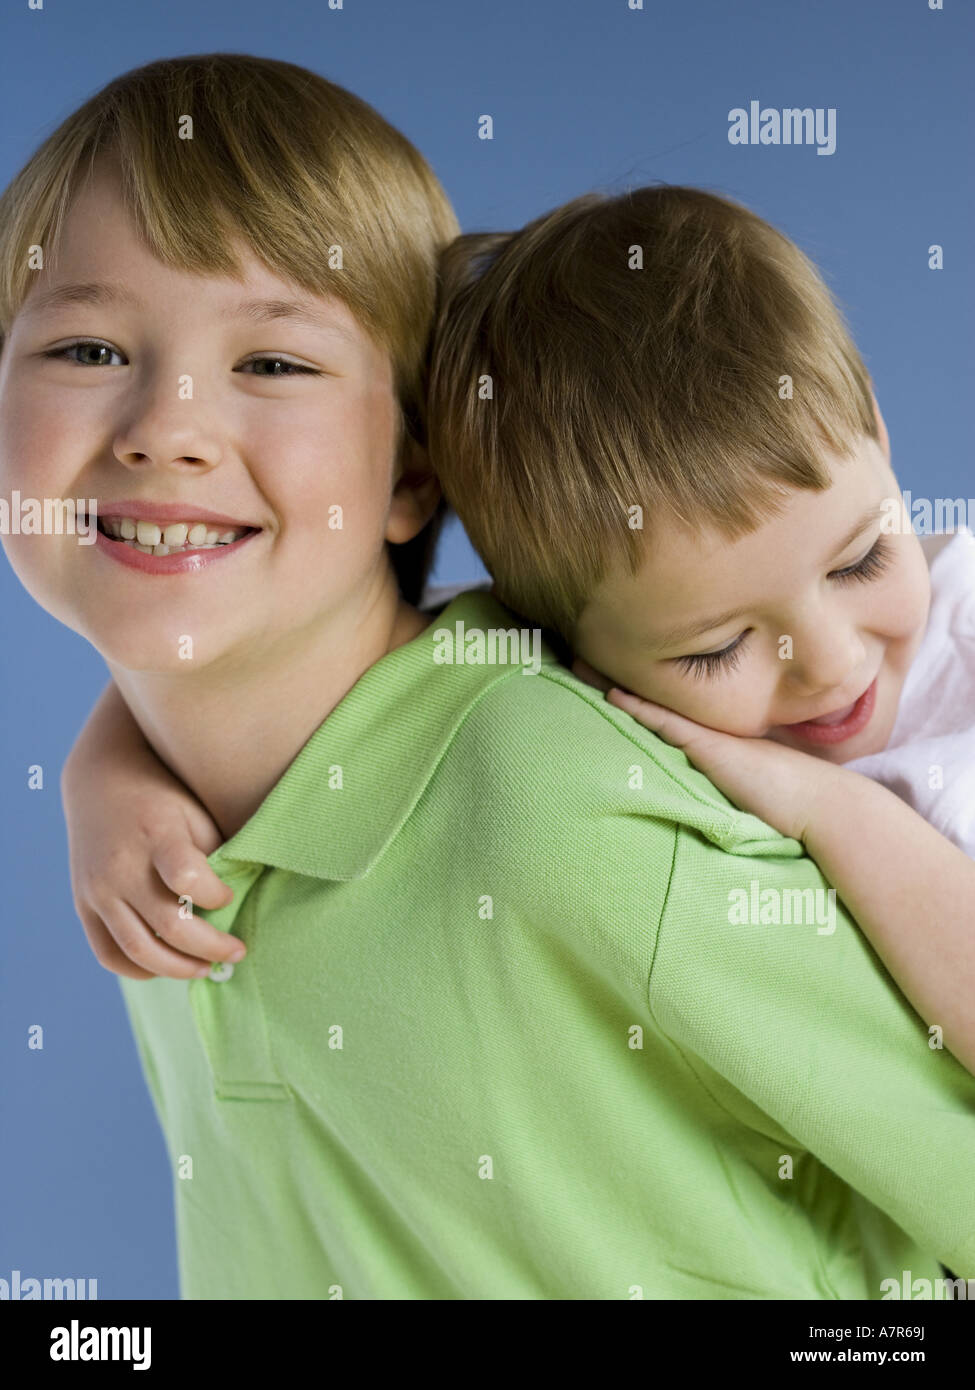 Woman Giving Little Boy Piggyback Ride Stock Photo, Picture and Royalty  Free Image. Image 10112006.